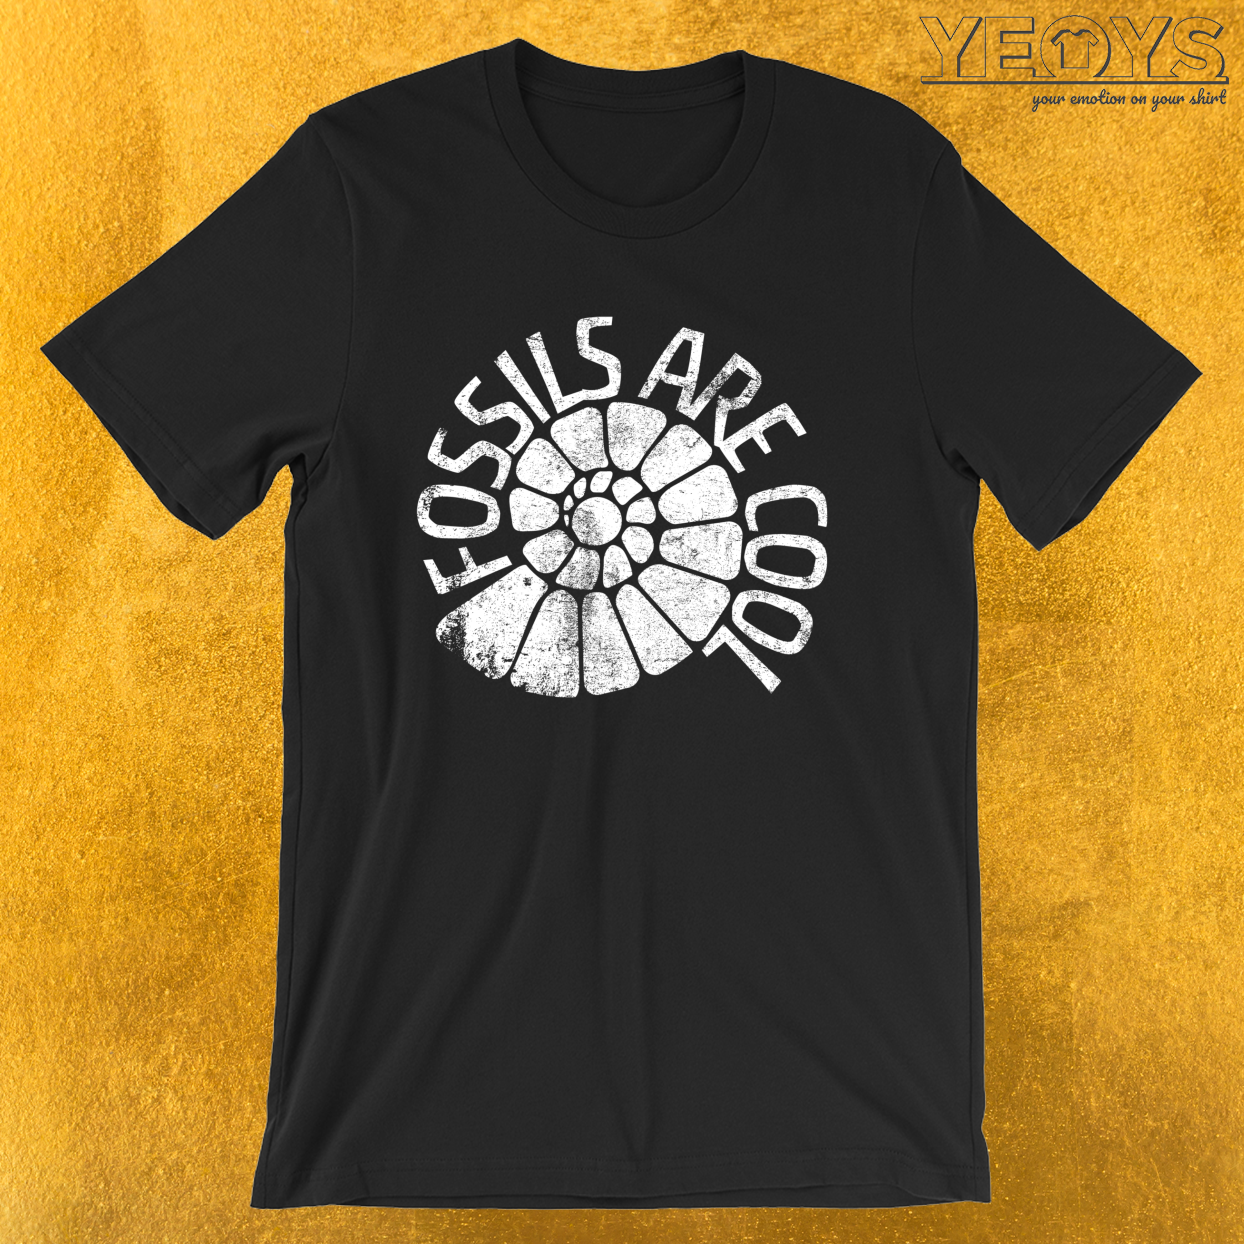 Fossils Are Cool – Fossil Hunting Geologist Tee